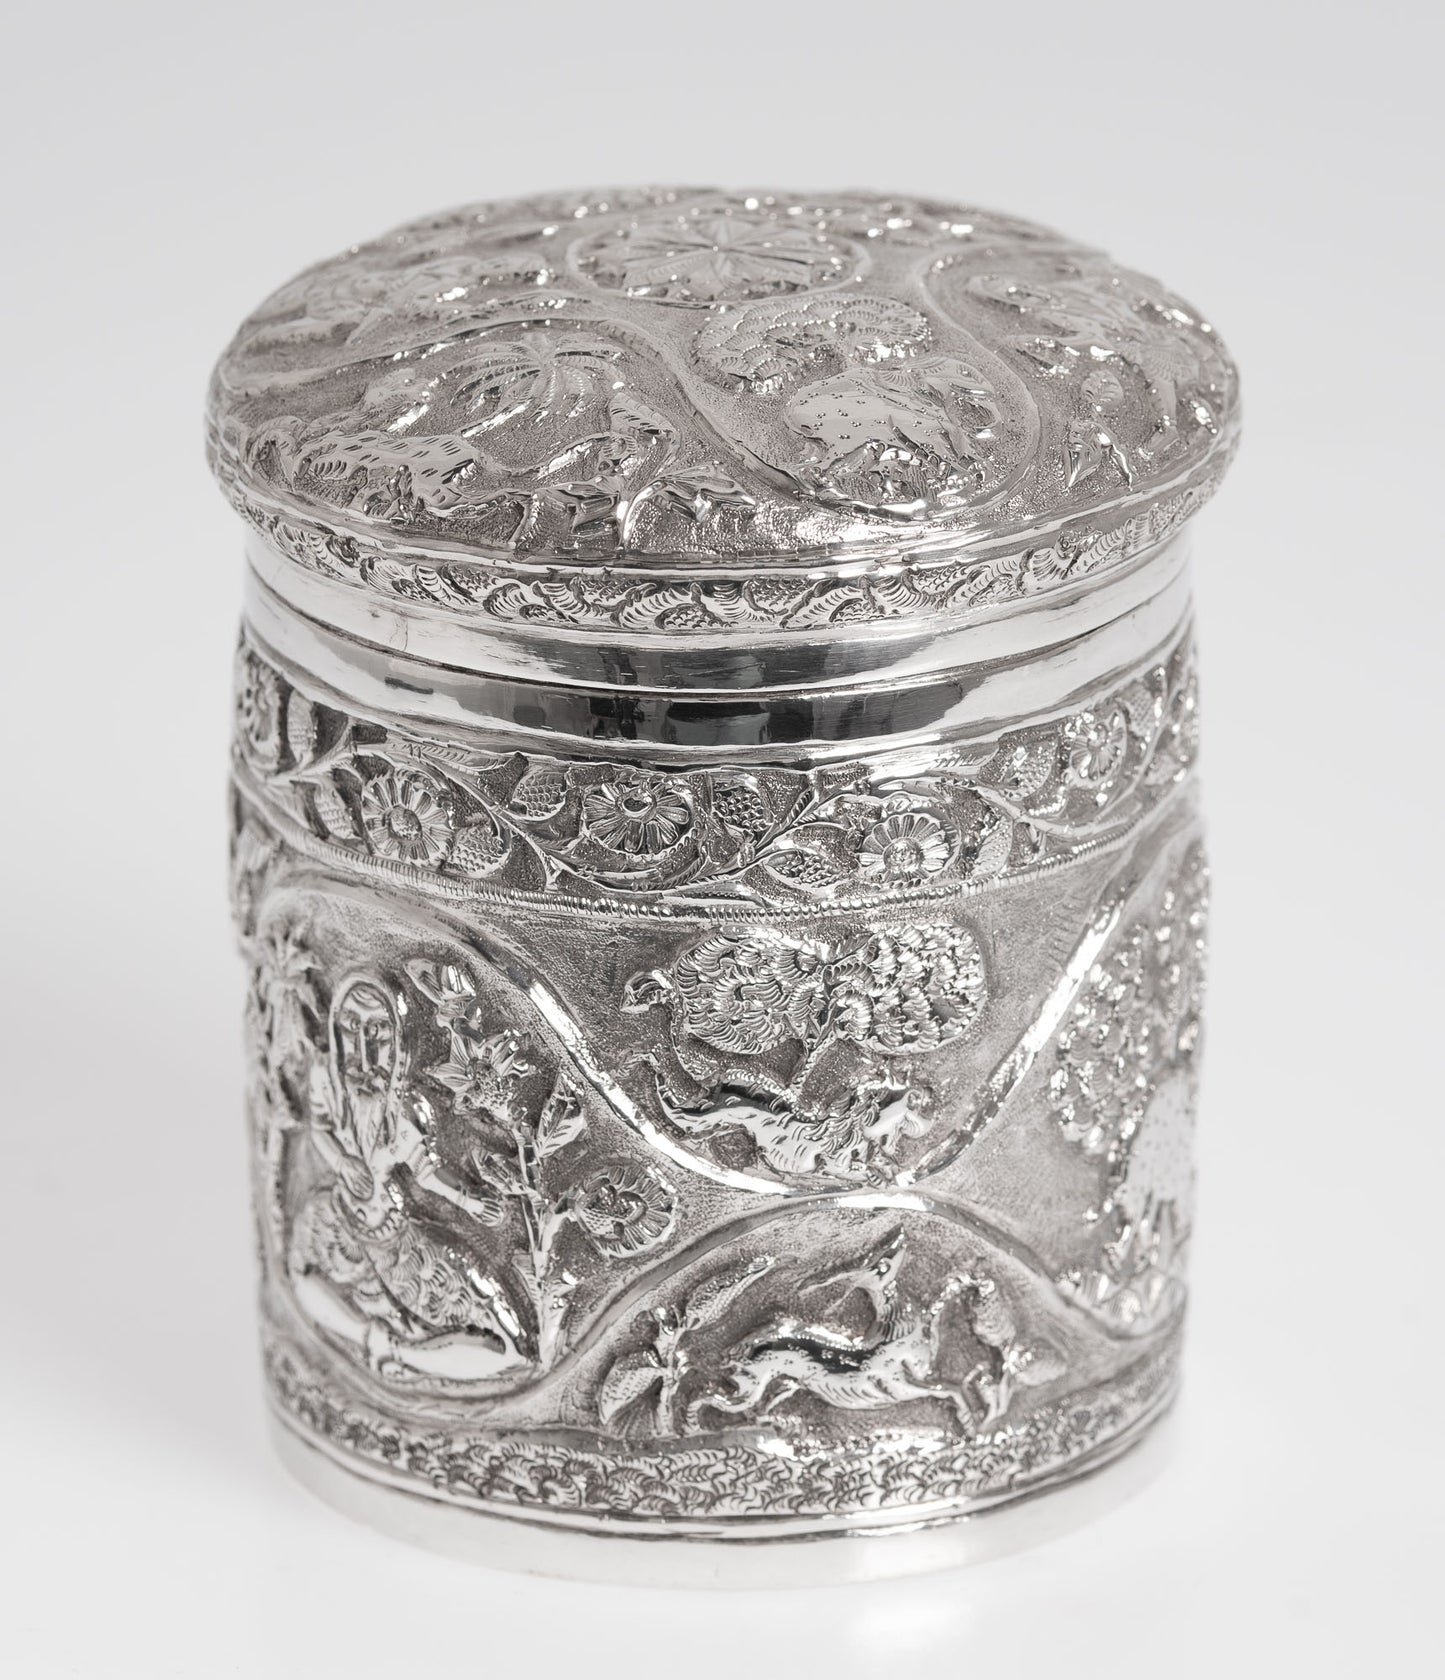 Antique Indian Silver Canister / Tea Caddy with Repousse Animals and Figures (3003)